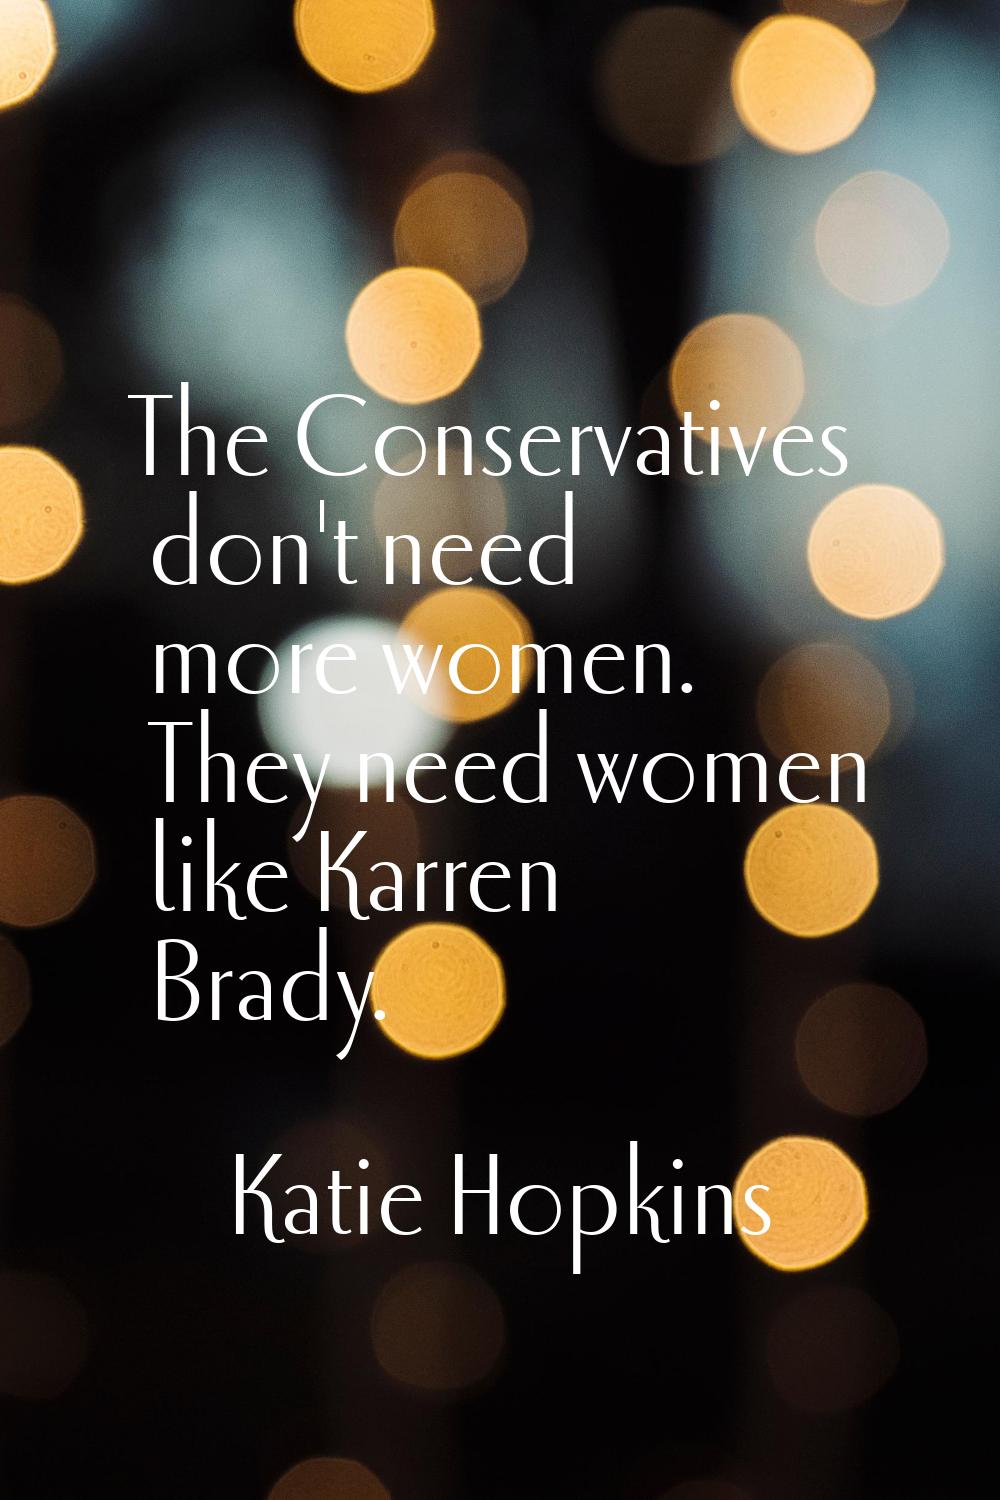 The Conservatives don't need more women. They need women like Karren Brady.